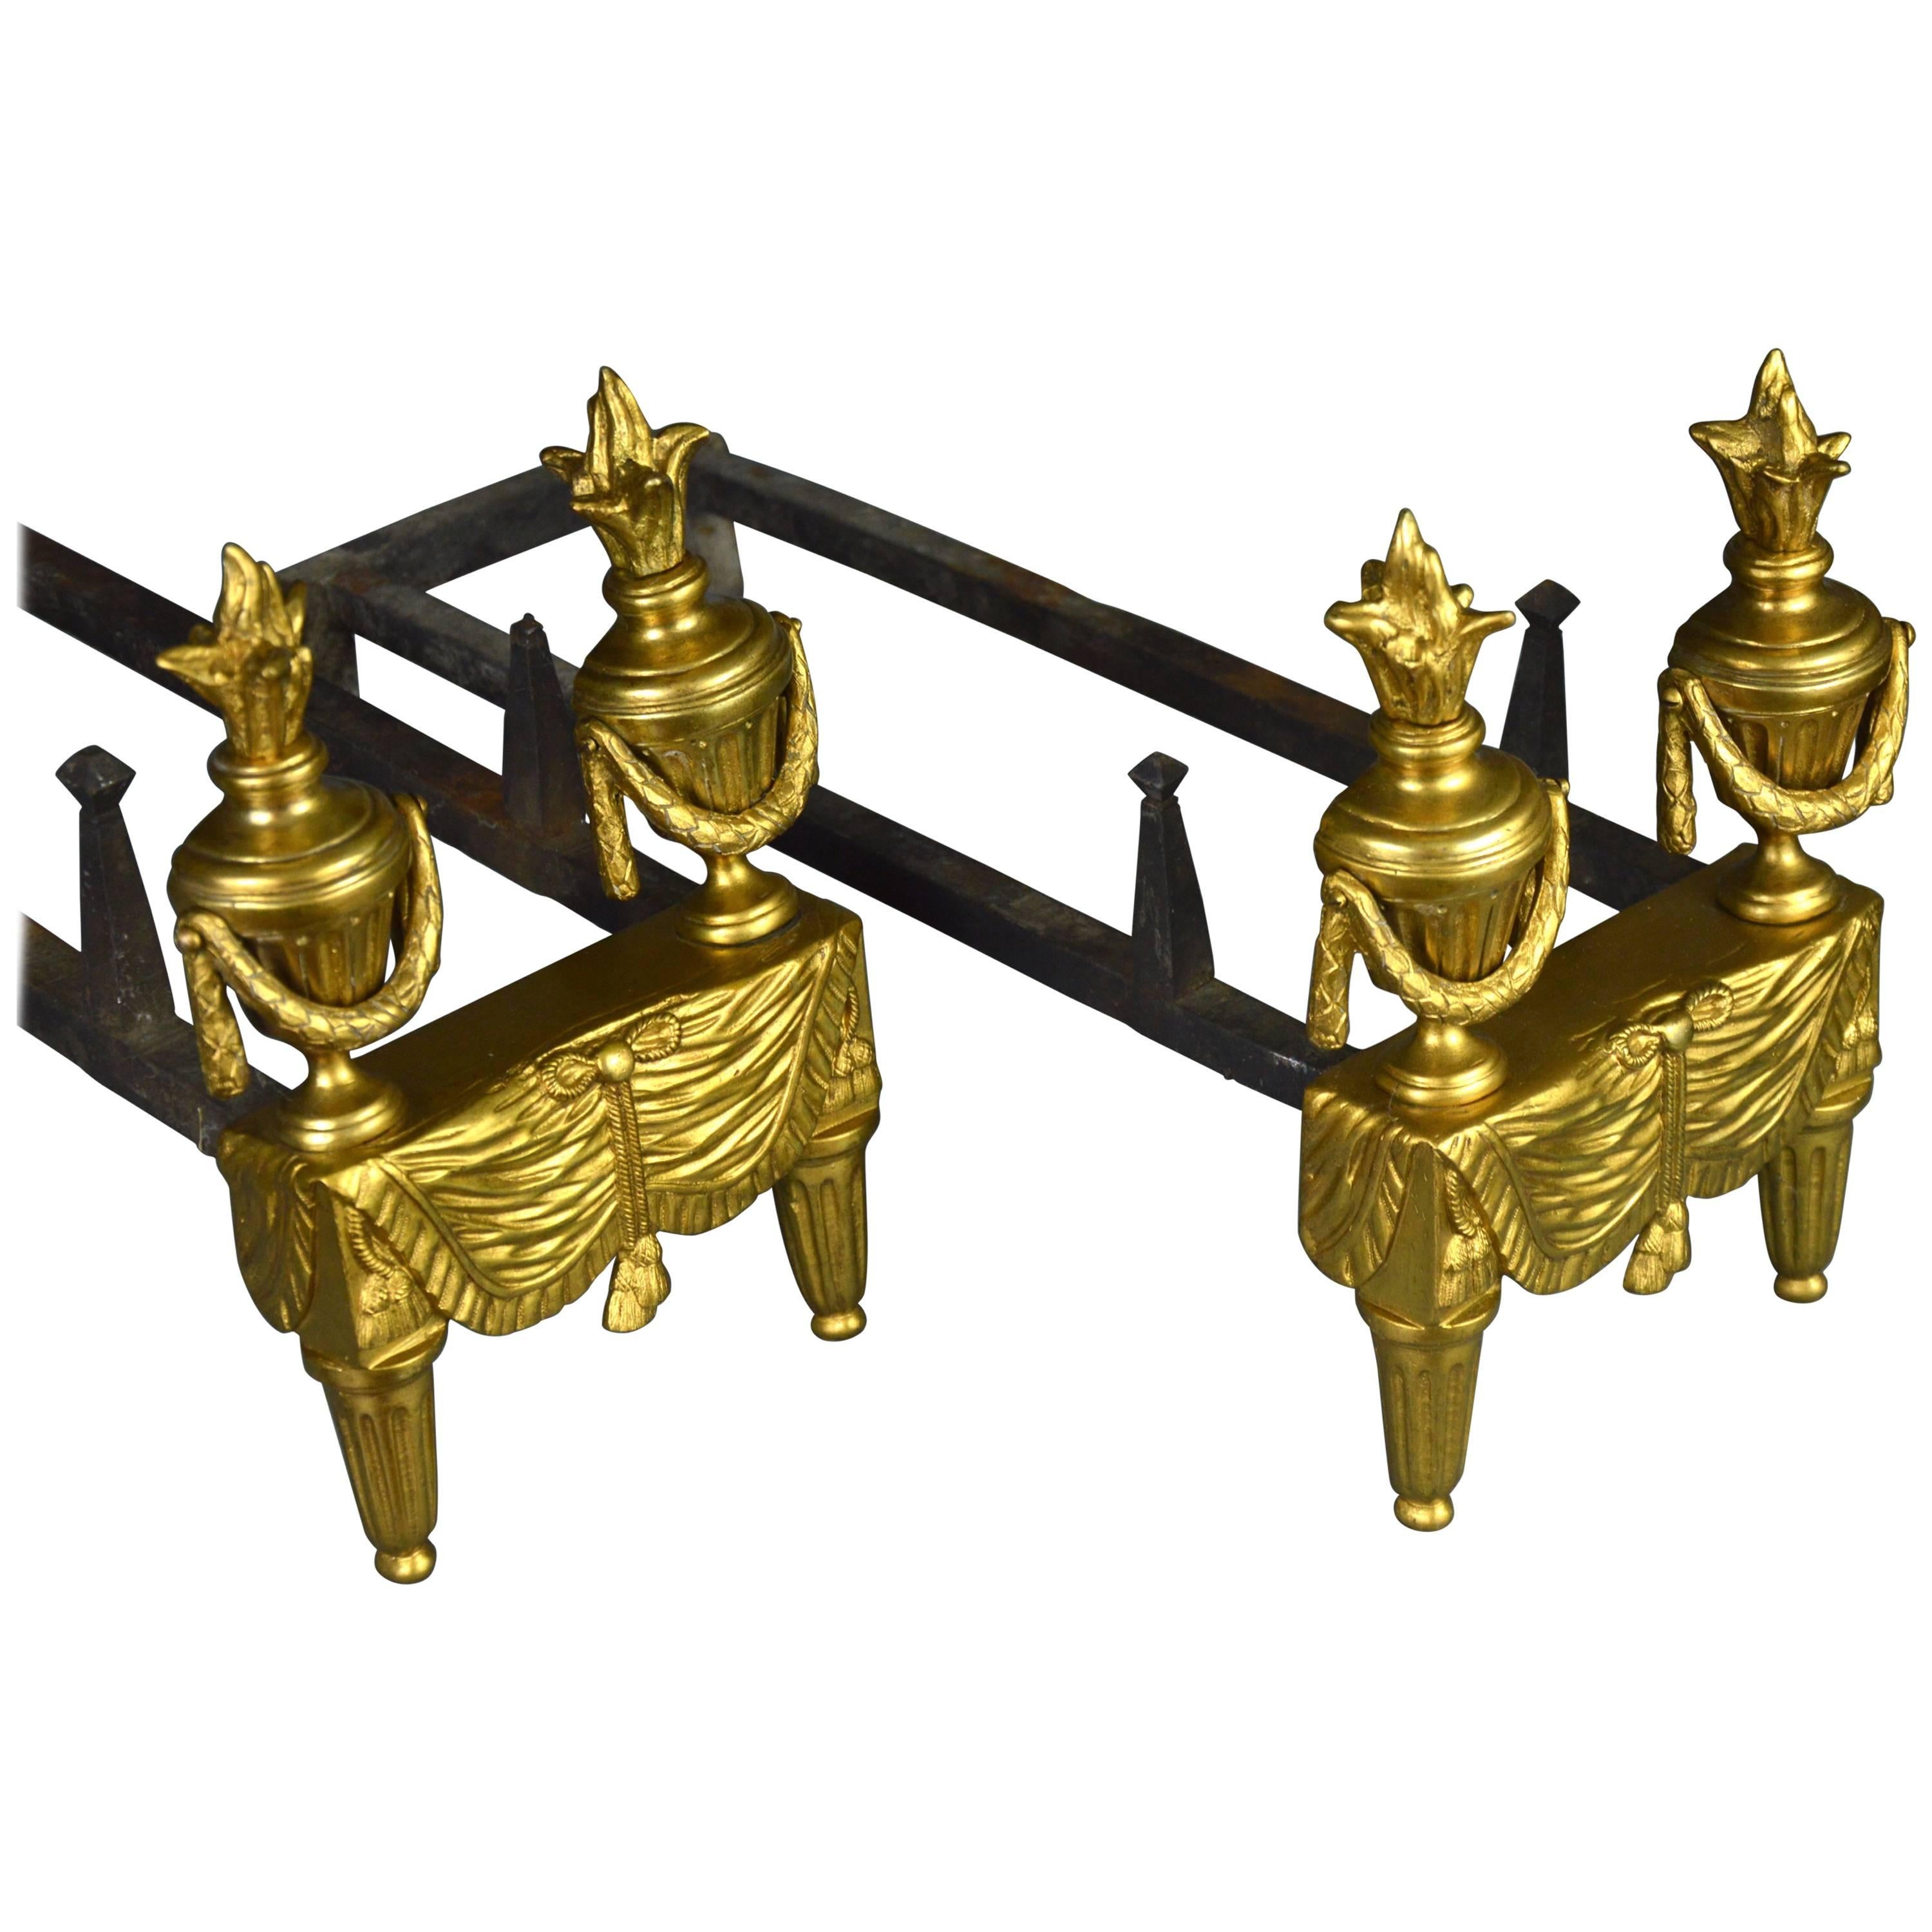 Pair of Antique French Gilt Bronze Andirons in a Style of Louis XVI 19th Century